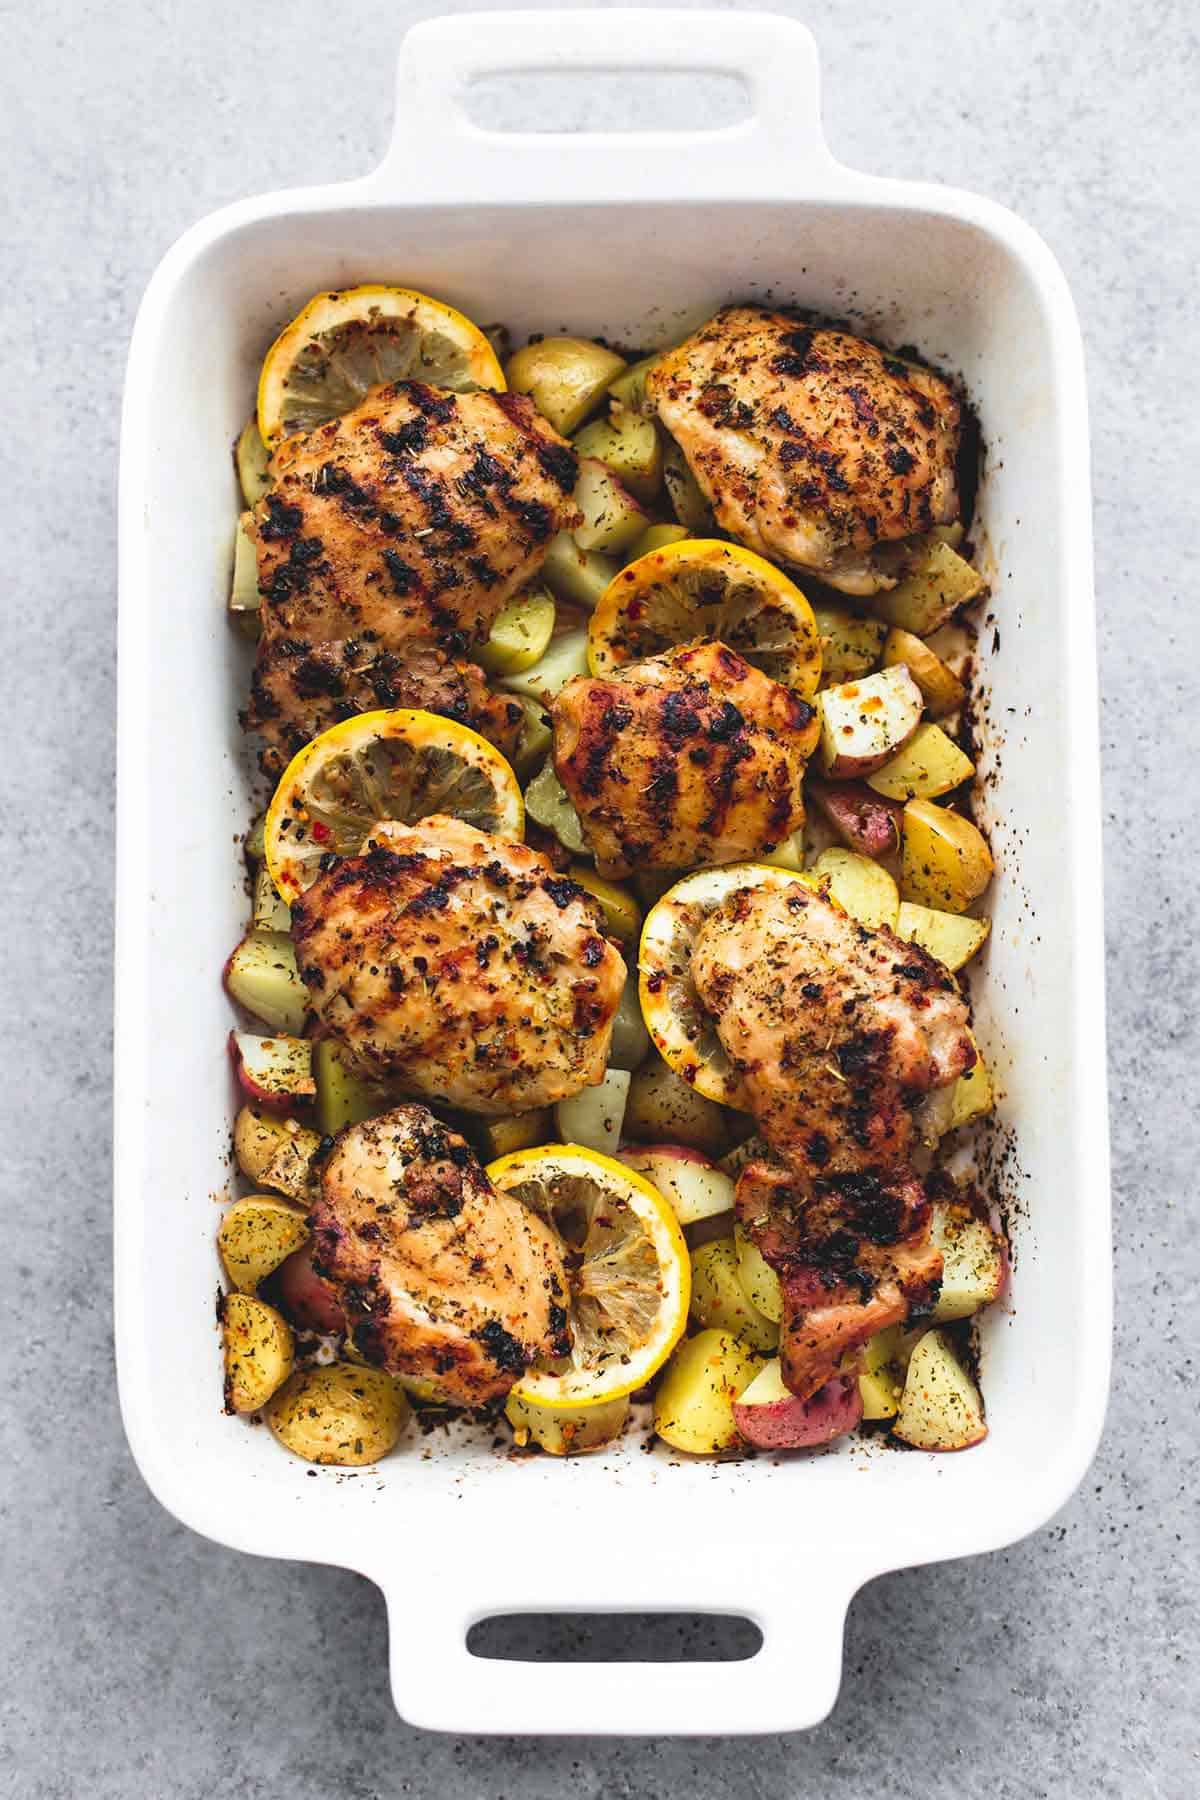 top view of baked lemon herb chicken & potatoes in a oven pan.